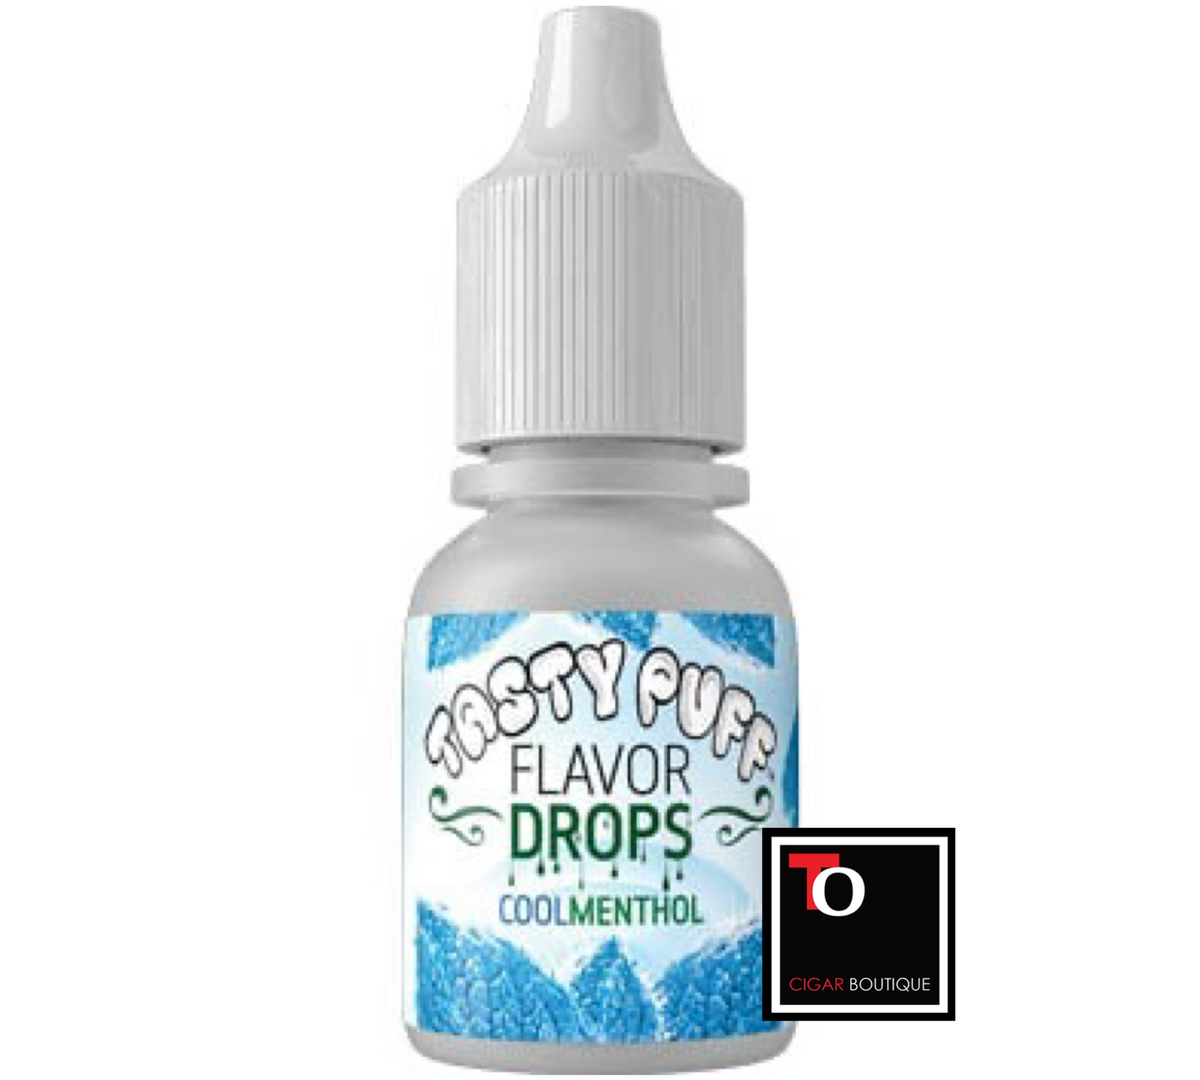 Cool Menthol Drops by Tasty Puff